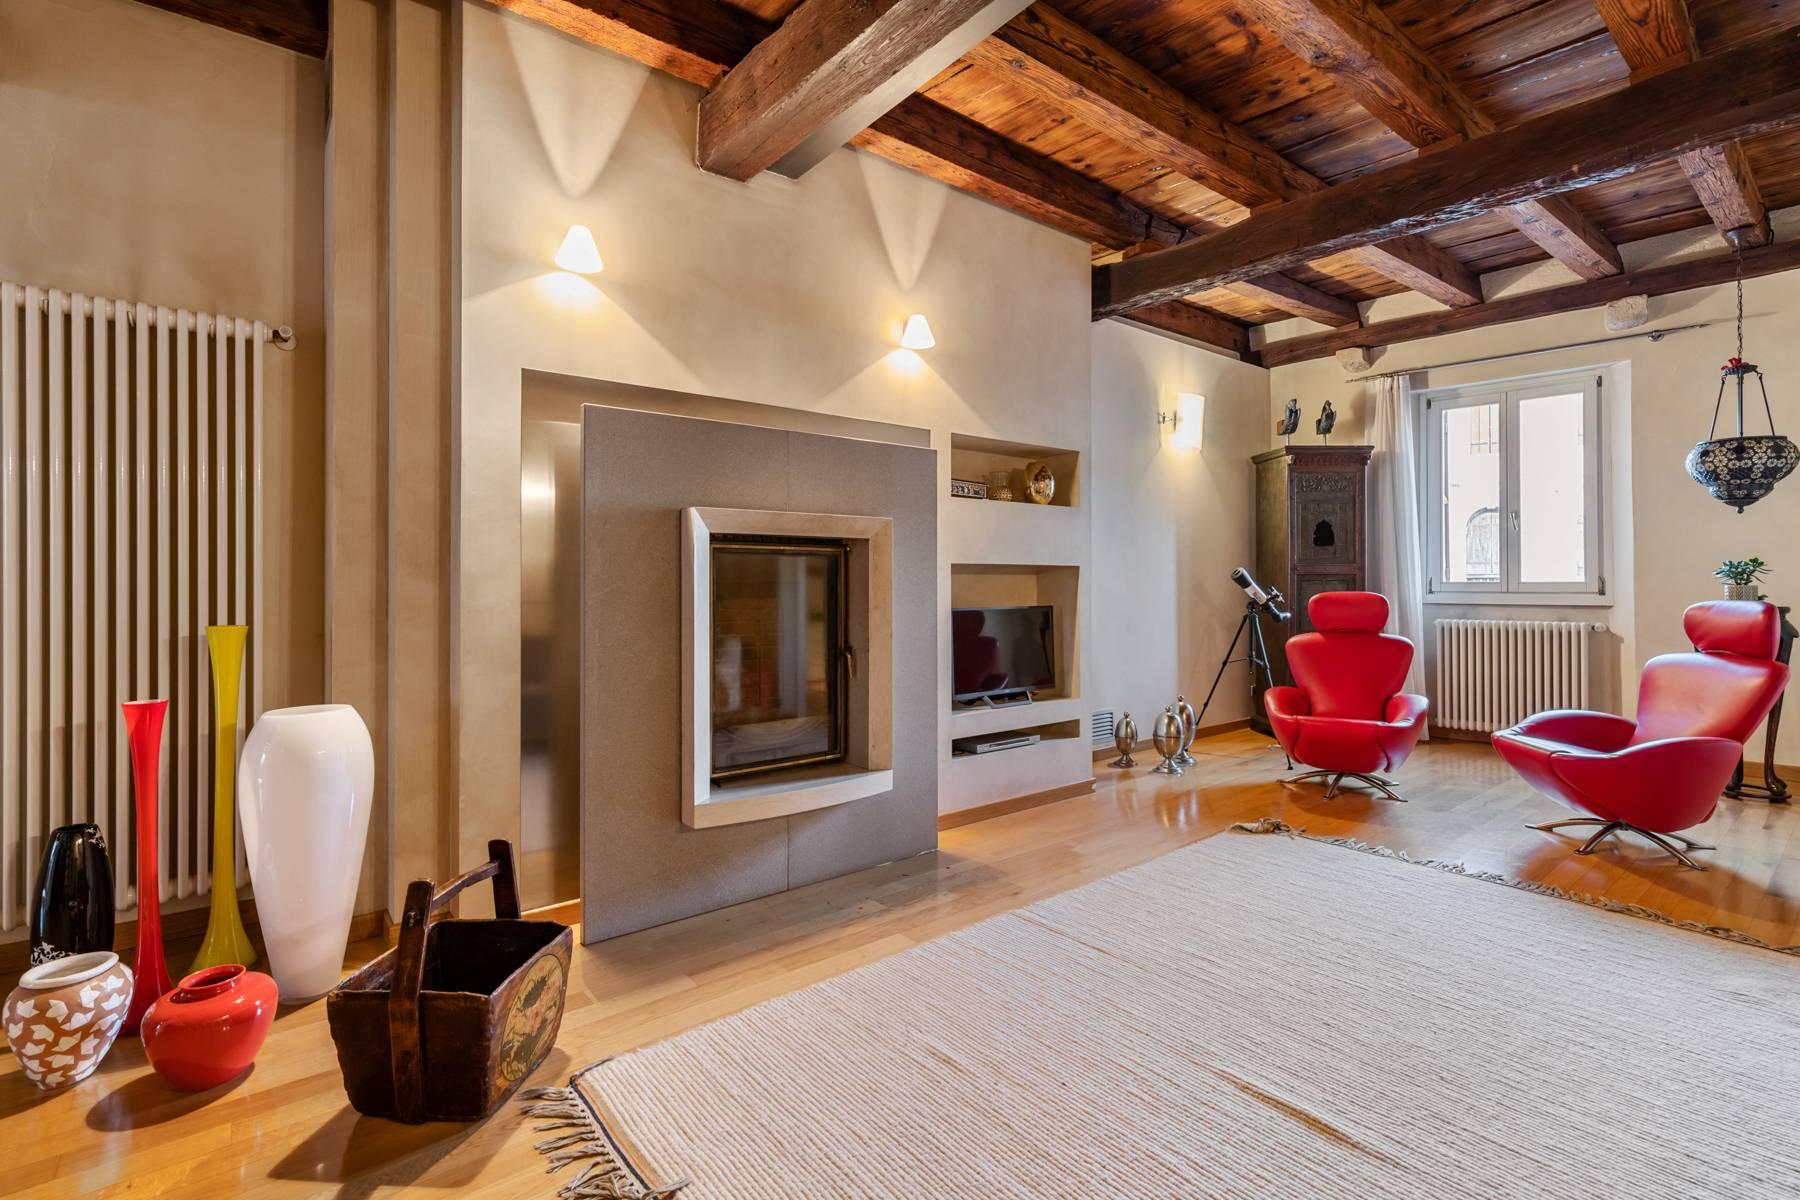 Elegant 15th century building, completely renovated in the historic center of Serravalle - 5